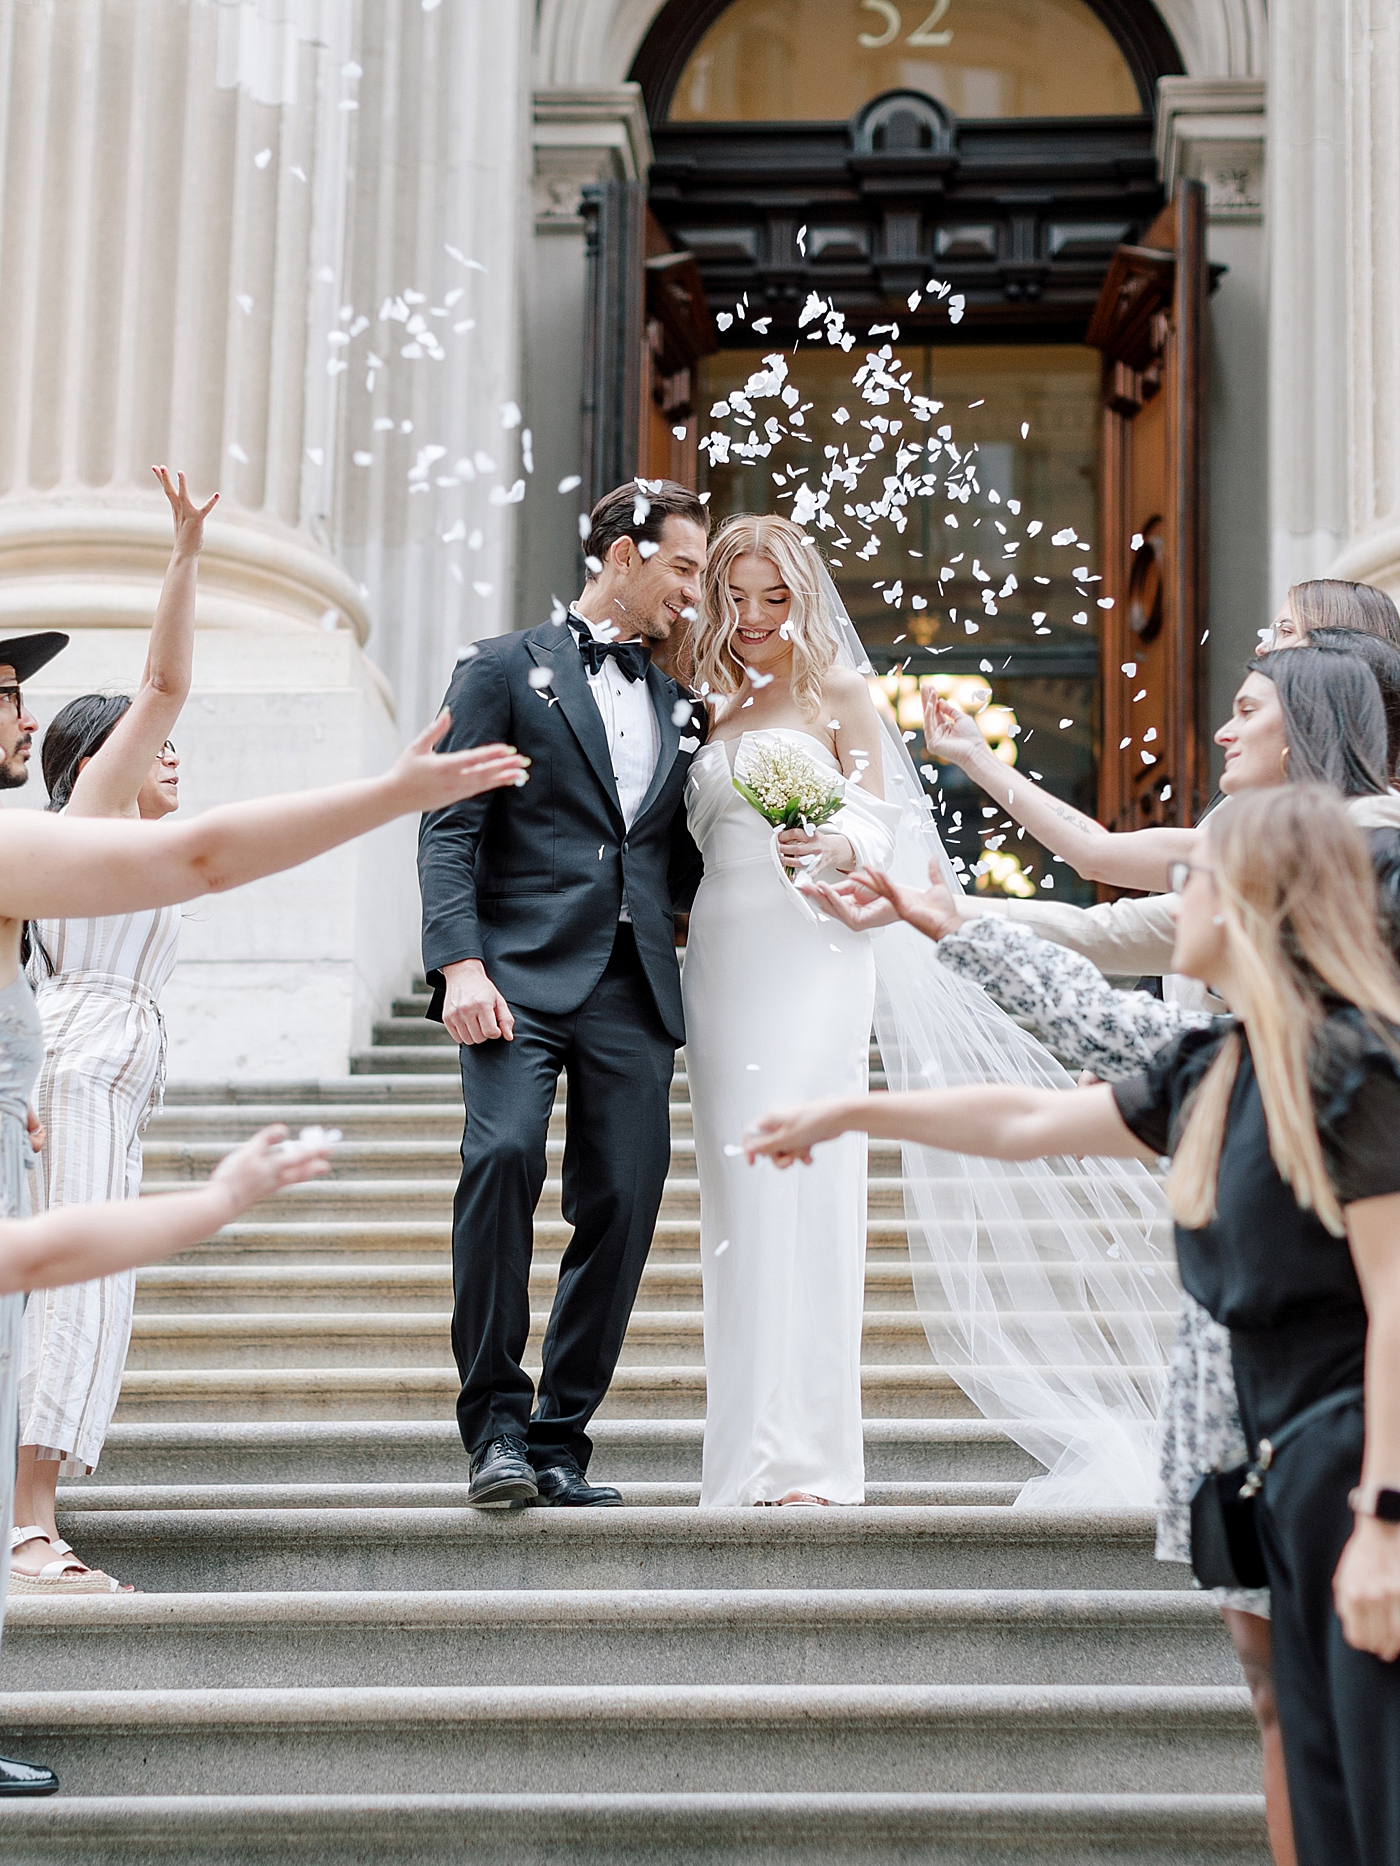 Bride and groom walking down stairs through confetti | Photo by Hope Helmuth Photography